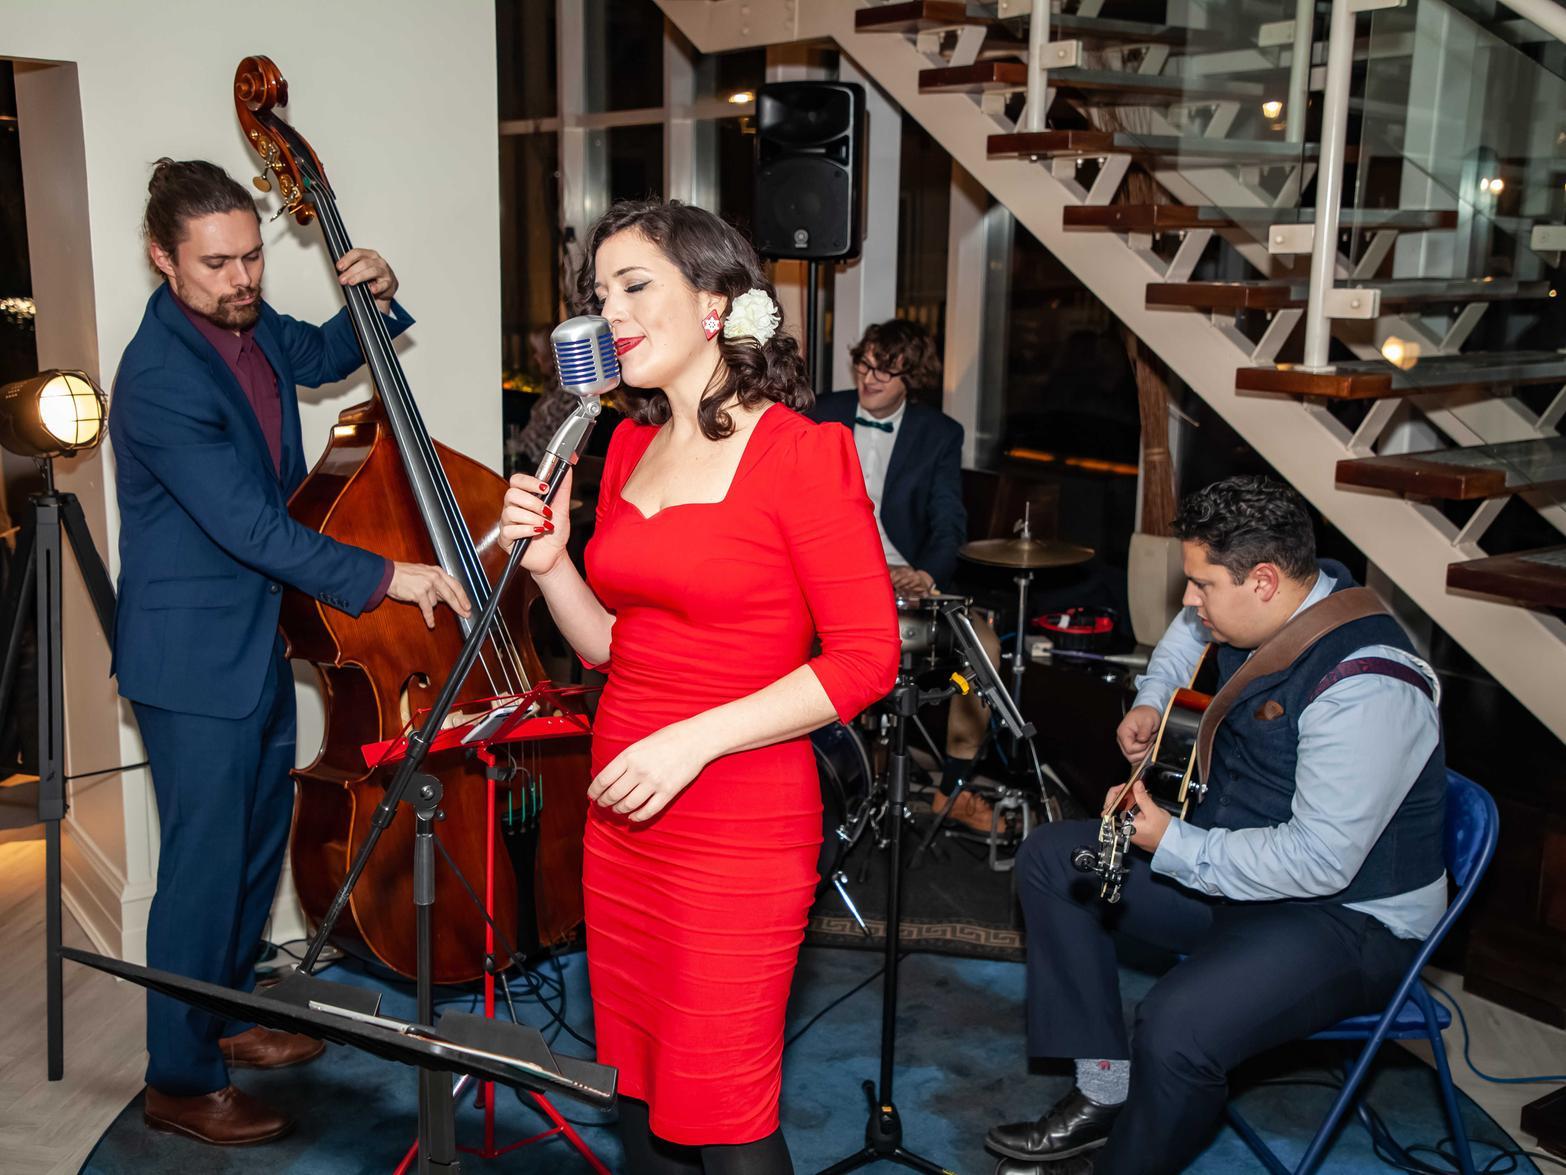 Guests enjoyed live entertainment at the newly refurbished hotel